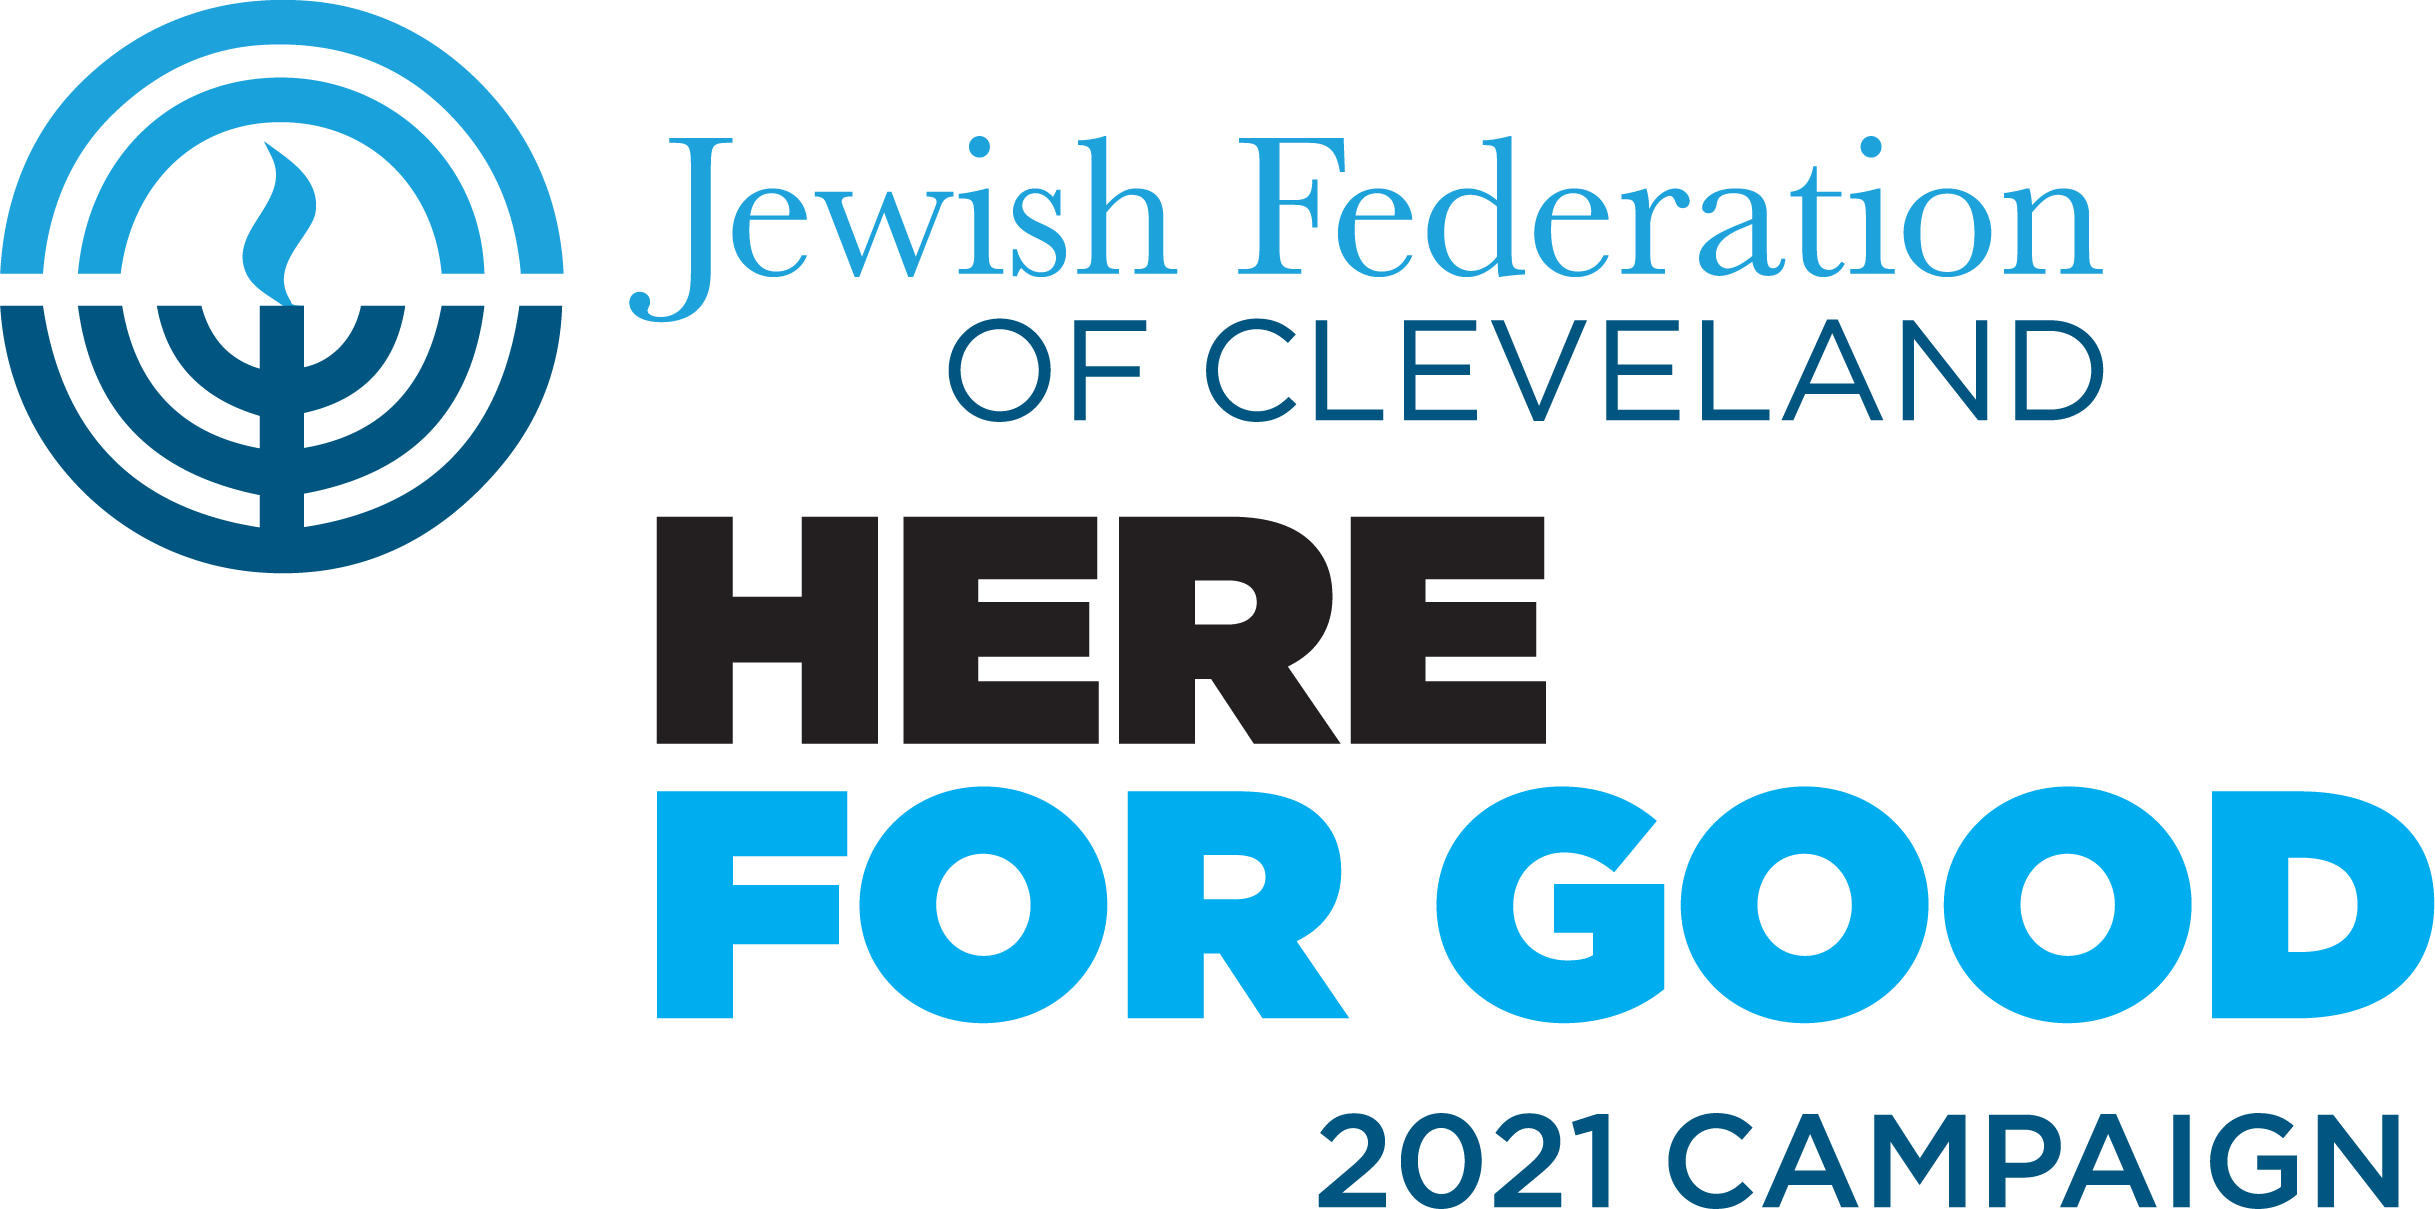 Donors to Jewish Federation Help Keep Community Strong in Wake of Global Pandemic by Contributing $33.1M in Annual Campaign